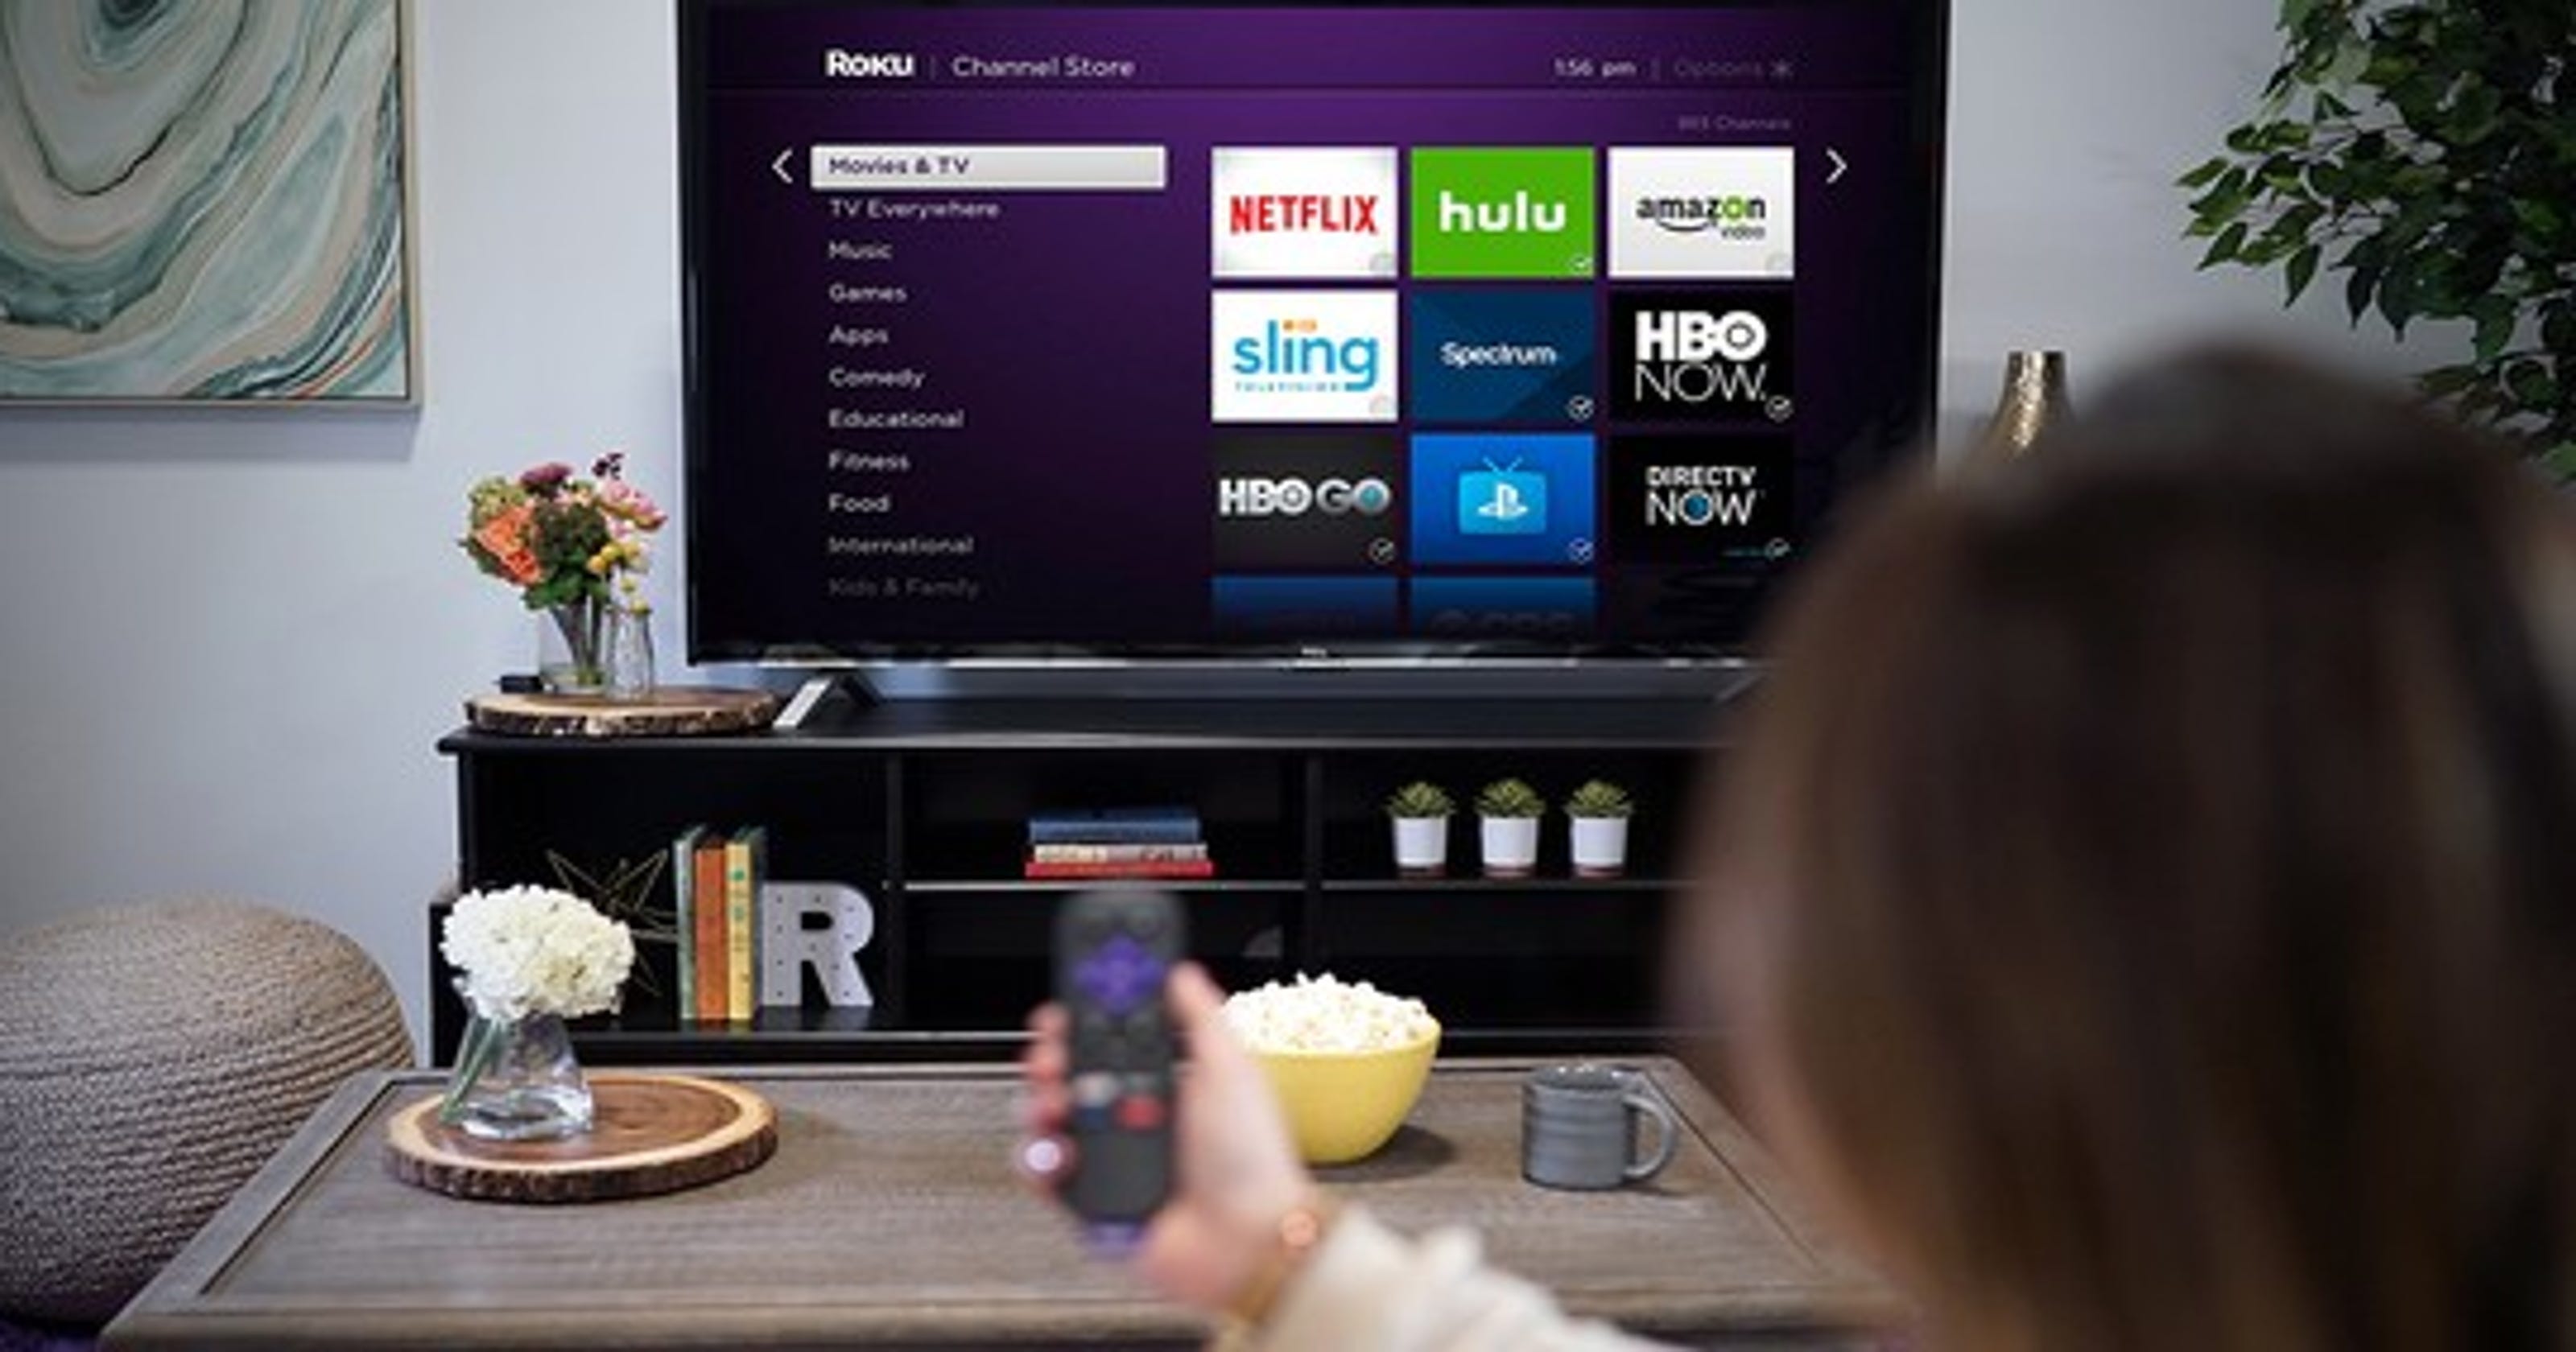 The Best Black Friday Tv Deals Of 2018 Samsung Lg Roku And More Updated November 16th